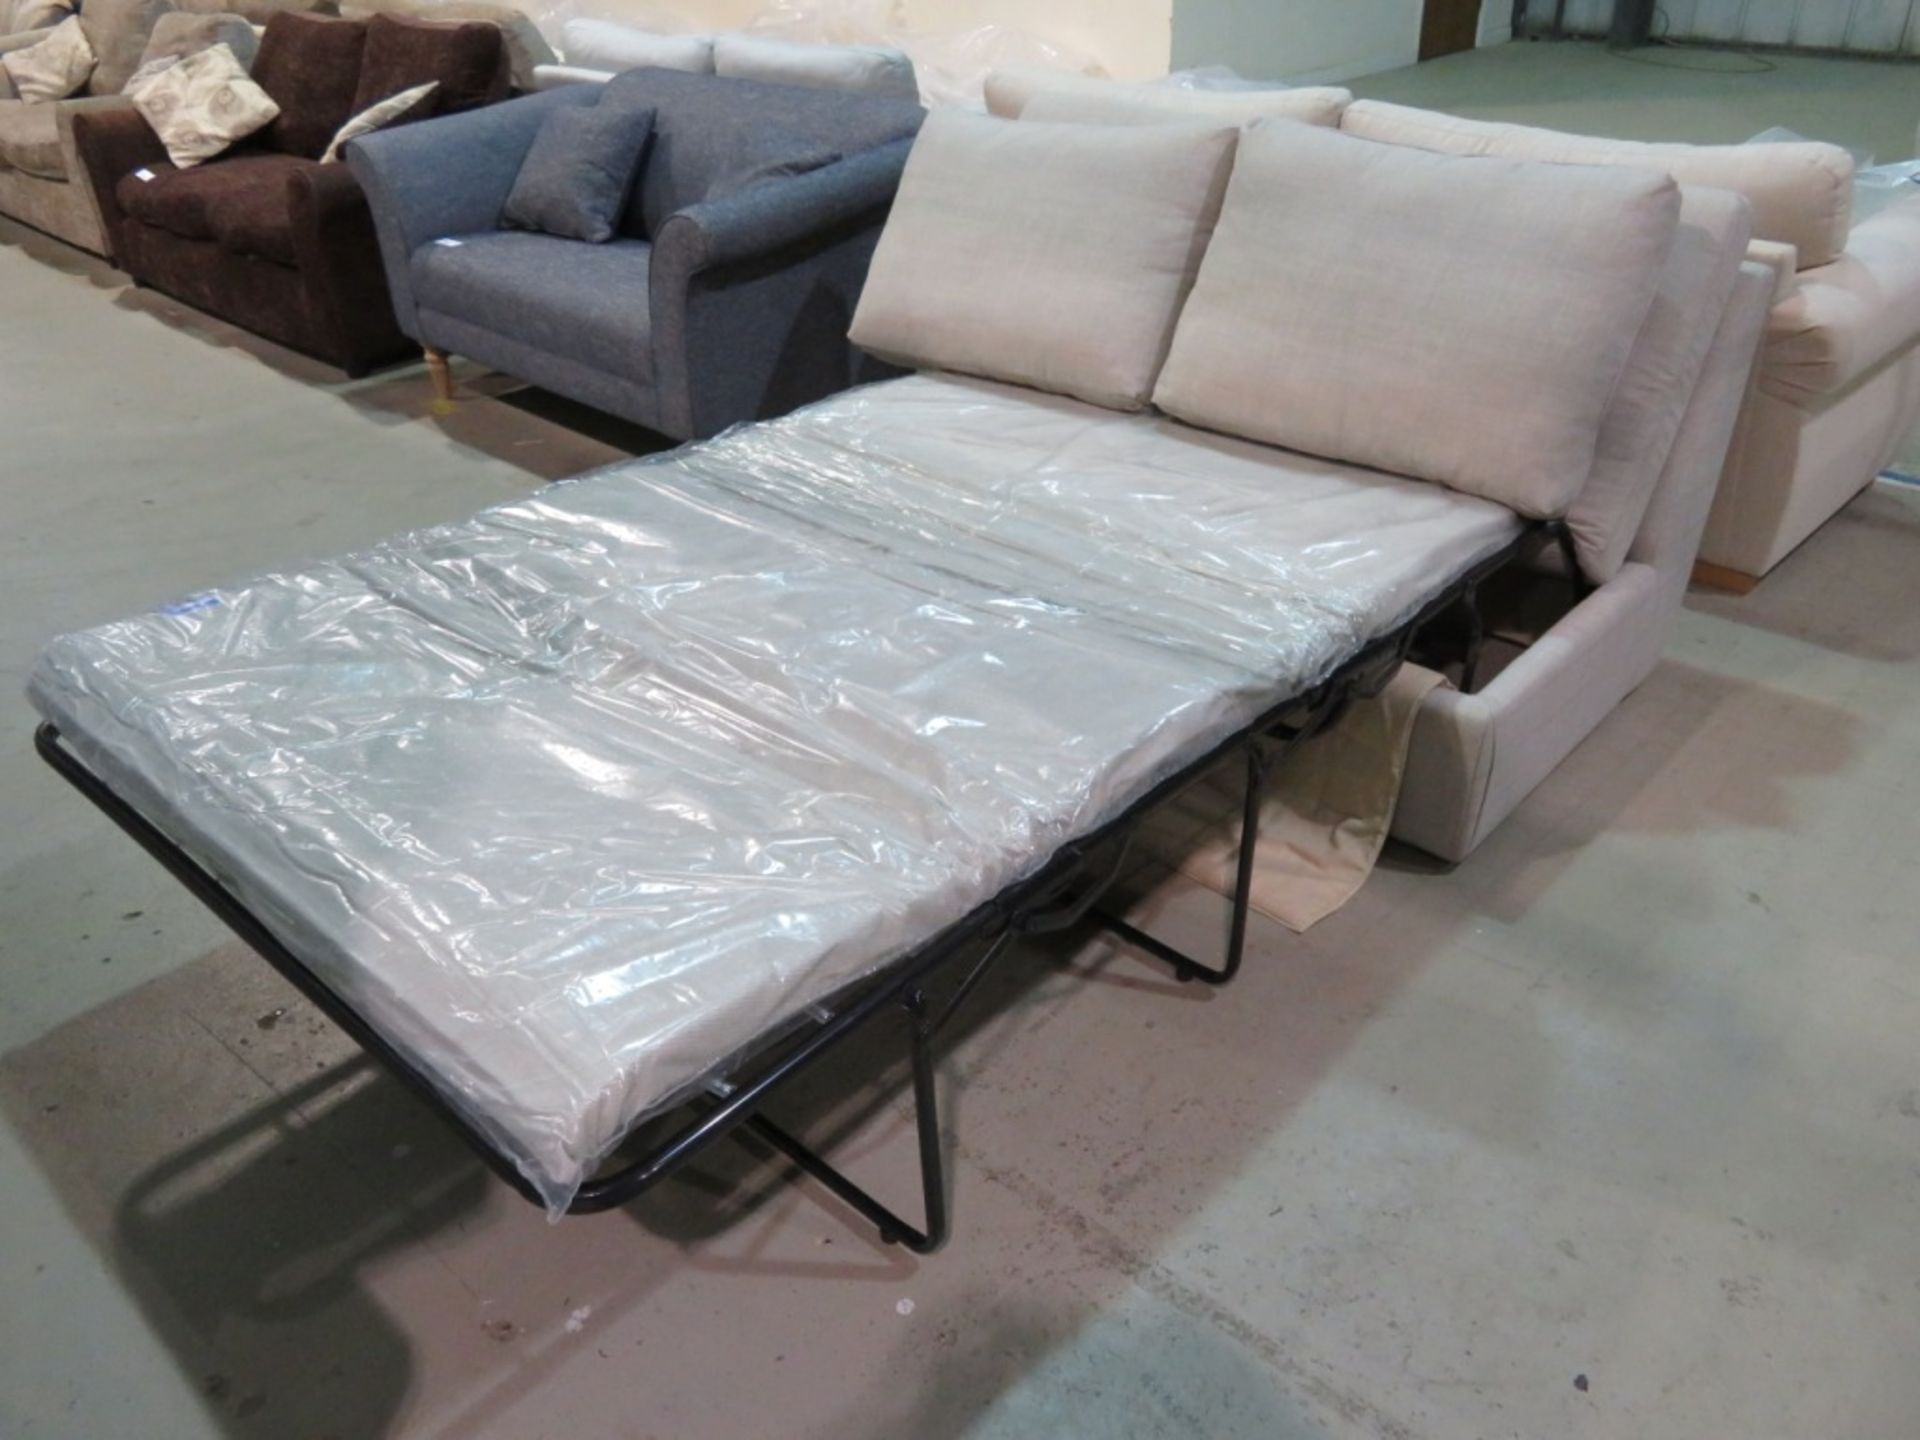 2 Seater beige sofa-bed. Ex Display - 1440 x 920mm (LxD) - Image 5 of 5